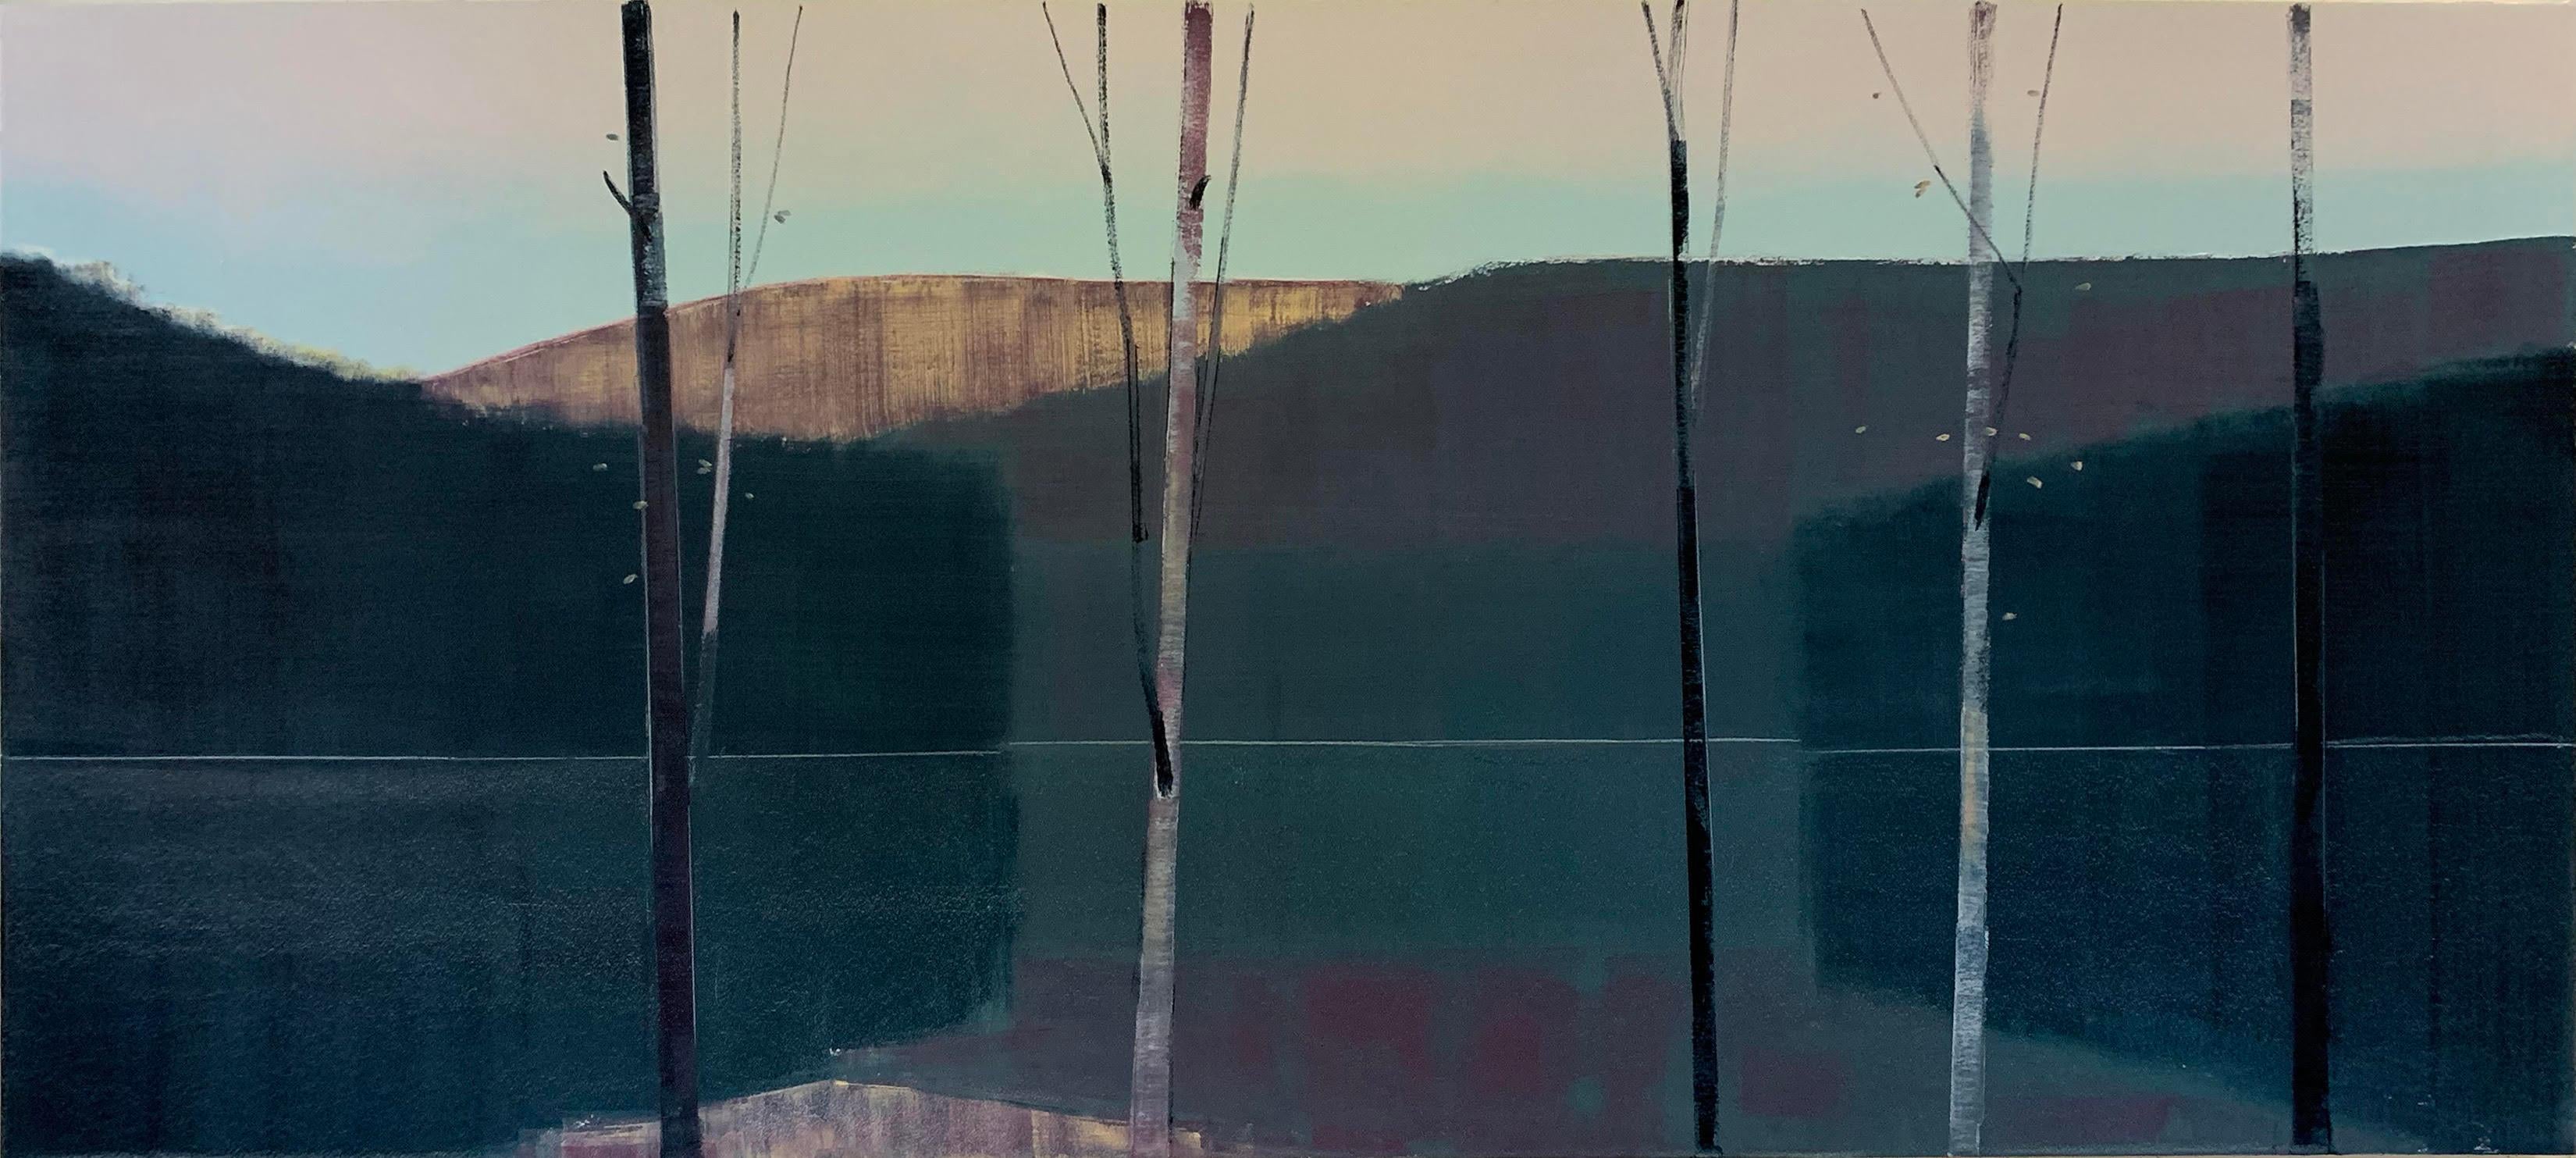 Stephen Pentak
2019, VI.II, 2019
oil on panel
34 x 76 in.

This oil painting on wood panel features a minimal abstracted mountain landscape rendered in shades of blue and purple.